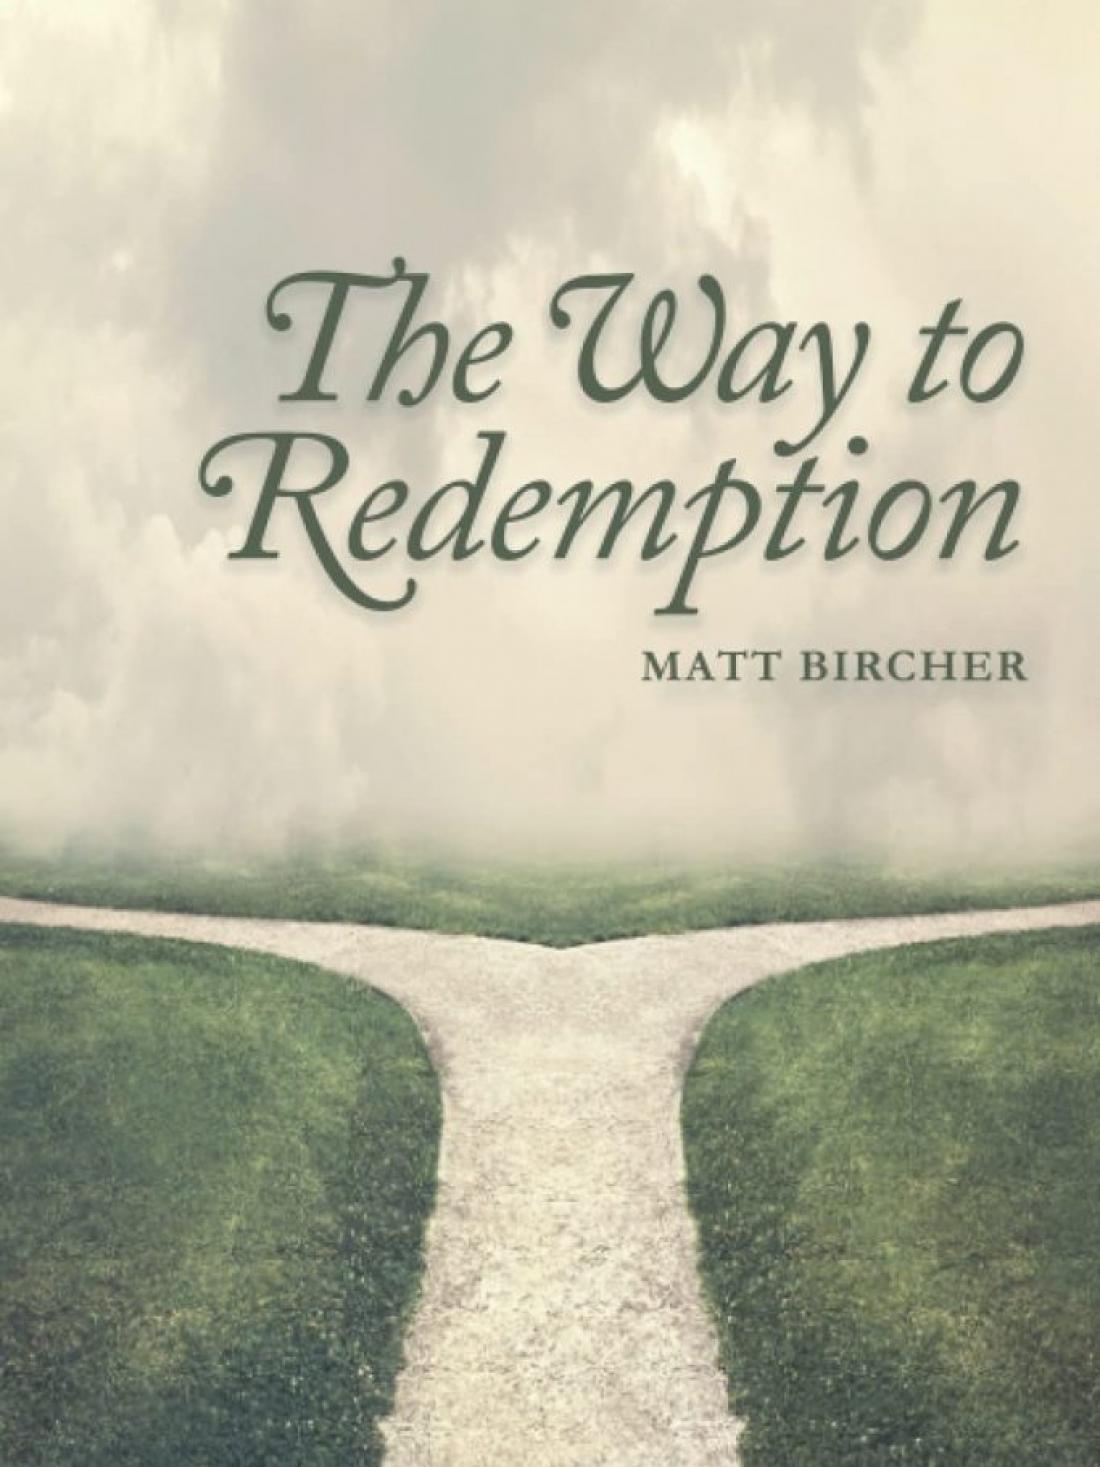 The Way to Redemption book cover